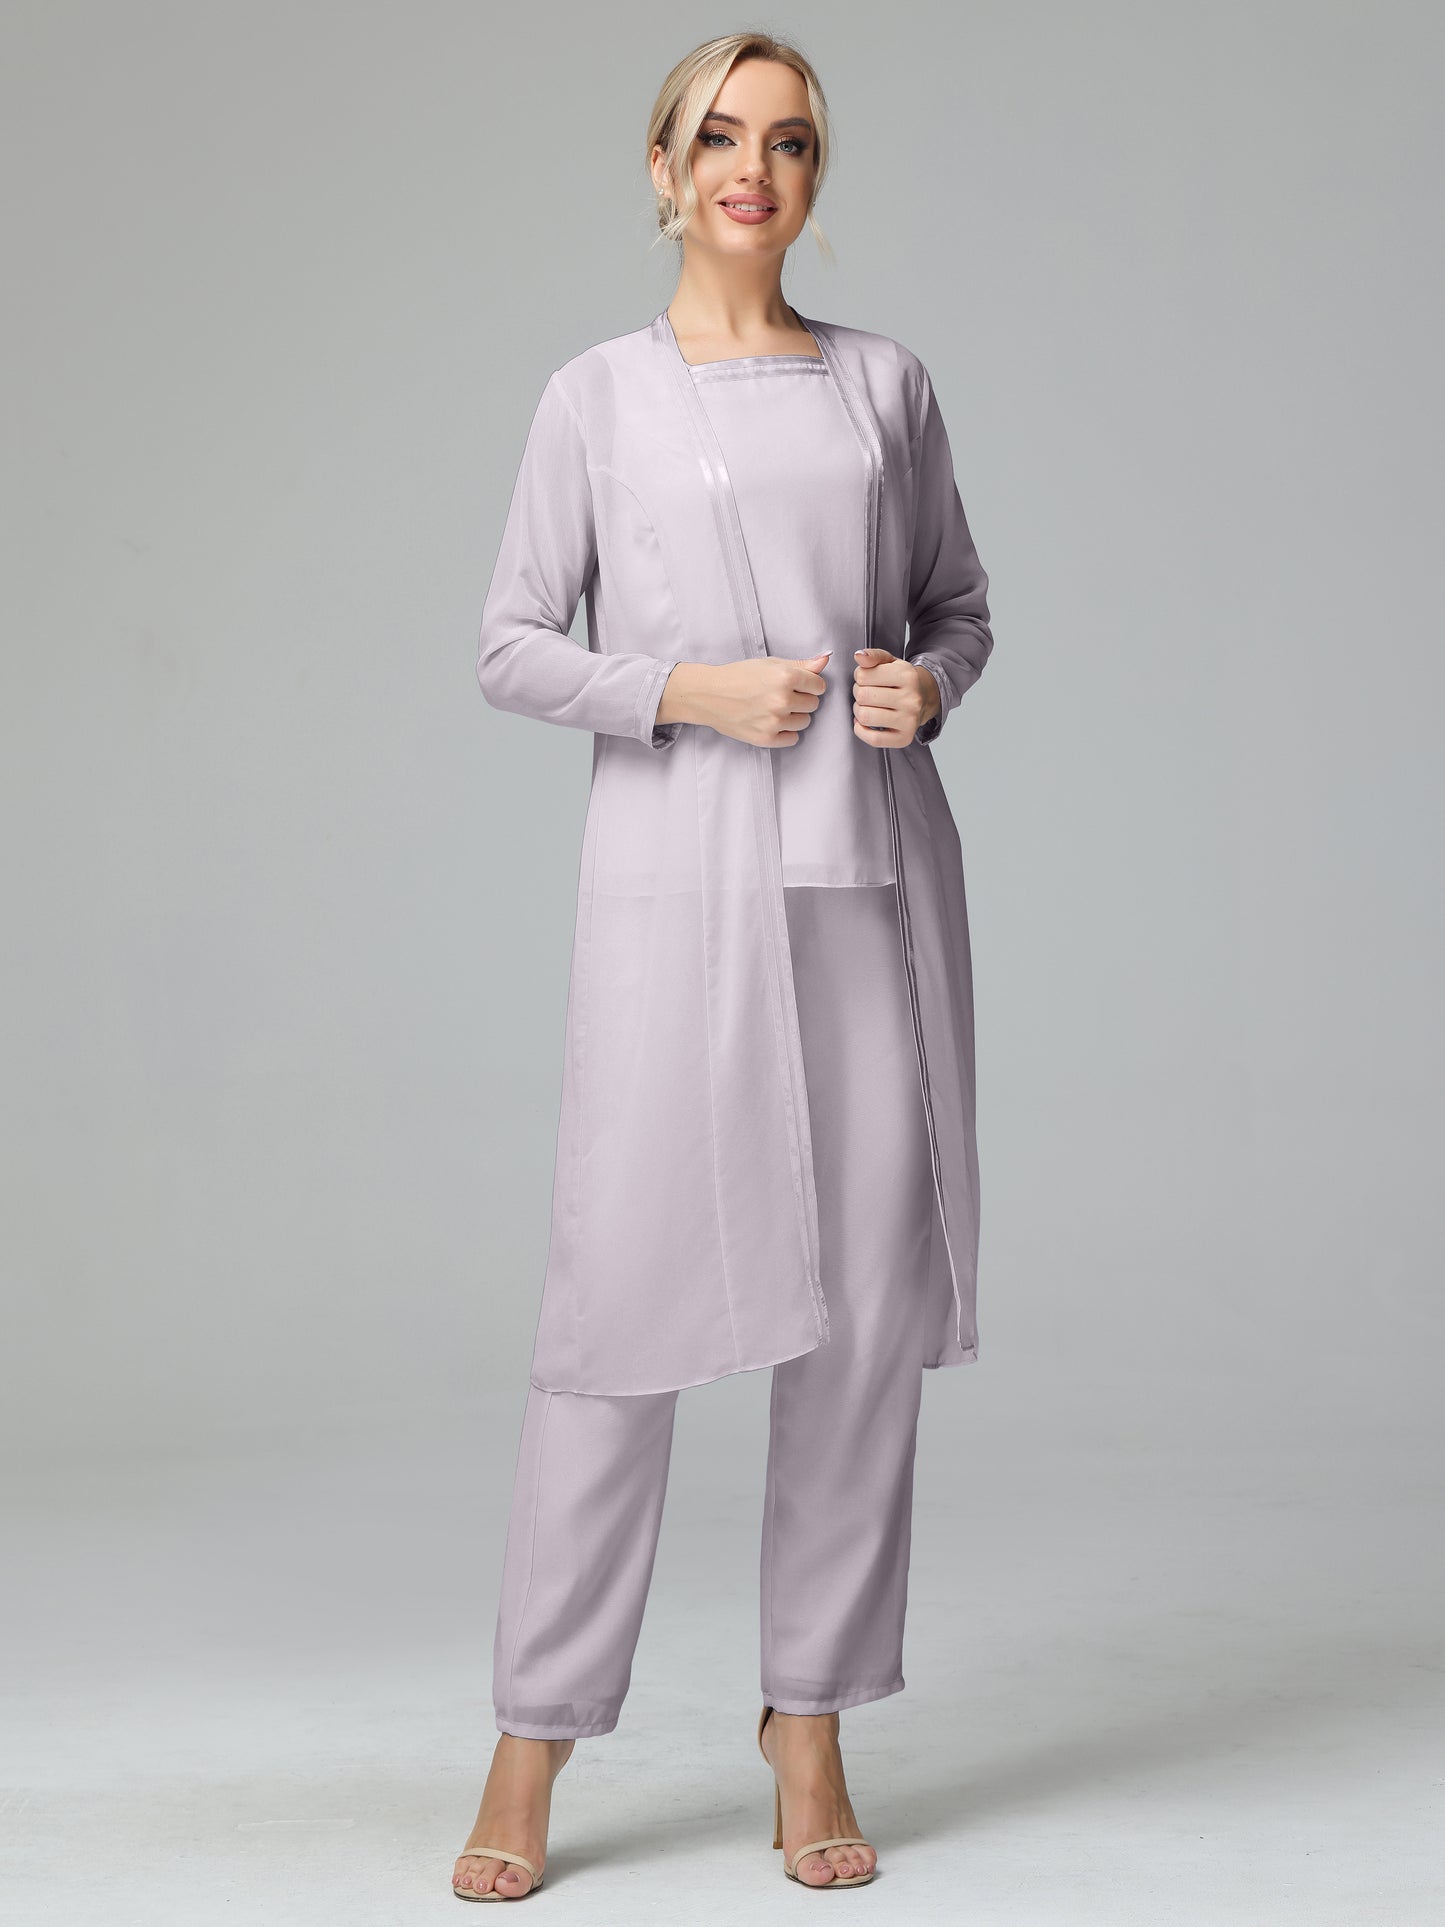 Special Long Sleeves Chiffon Mother of the Bride Dress